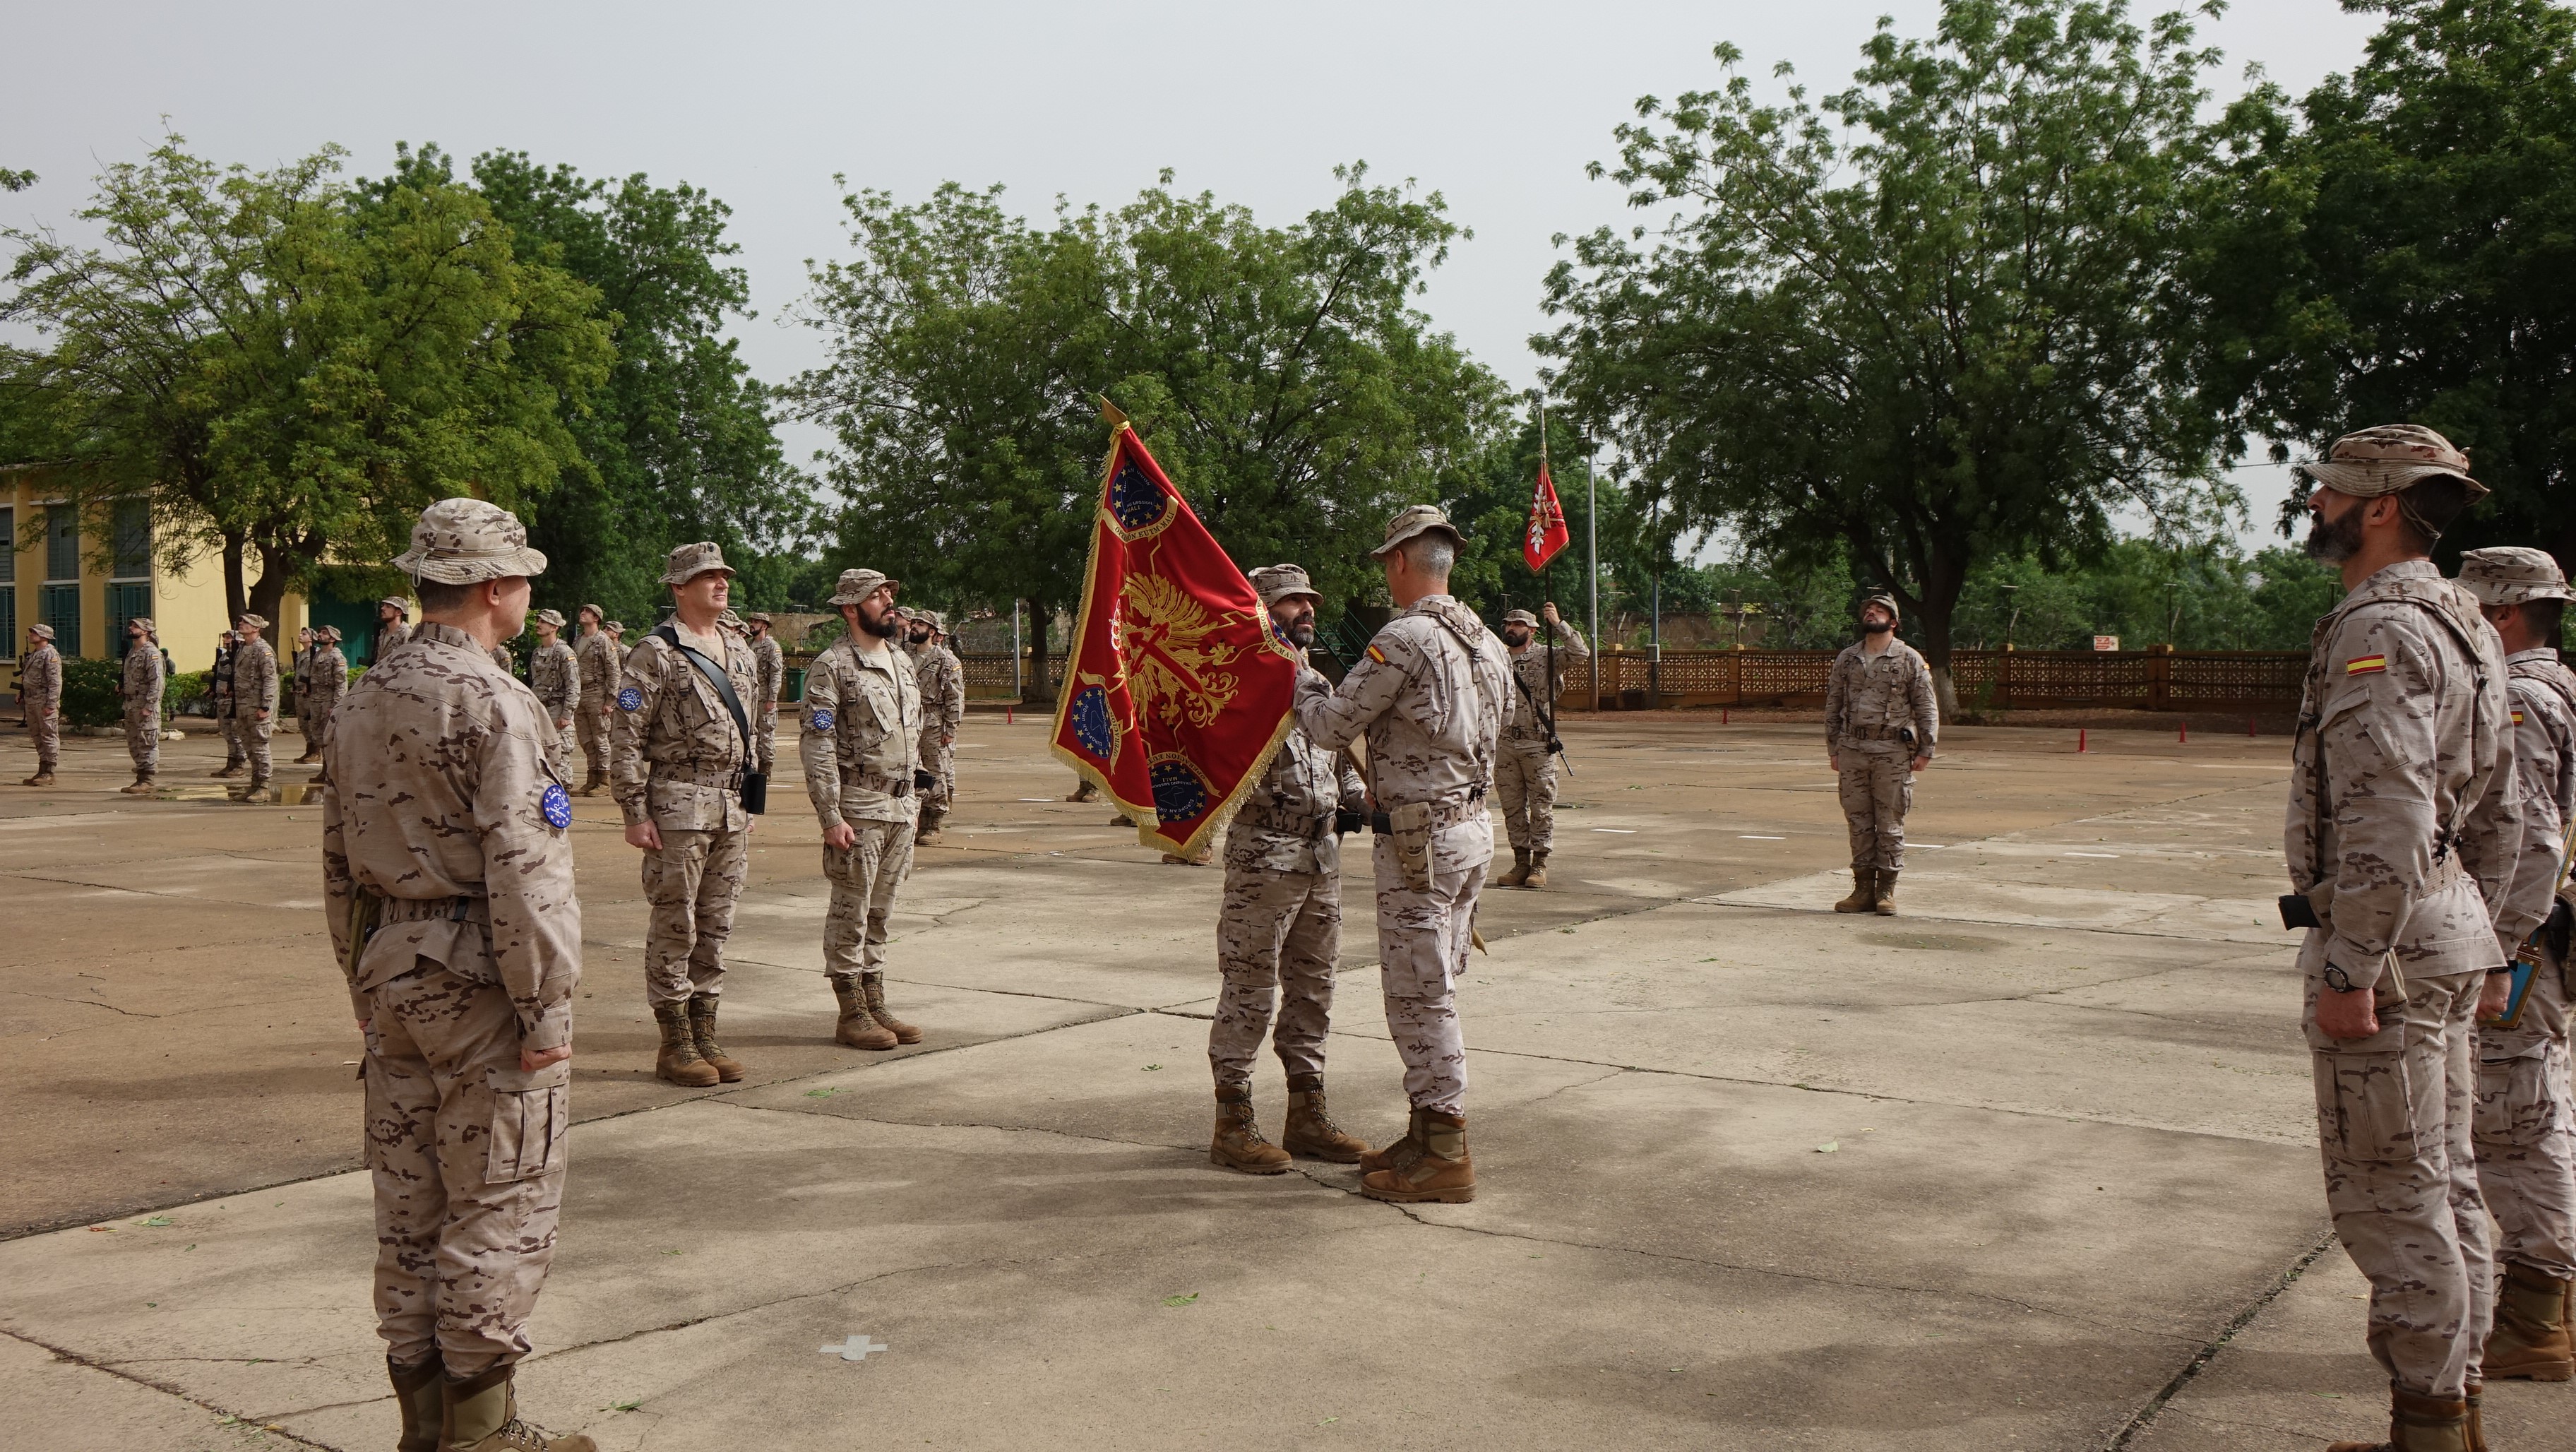 The Spanish Legion sets the backbone of the new contingent in EUTM Mali